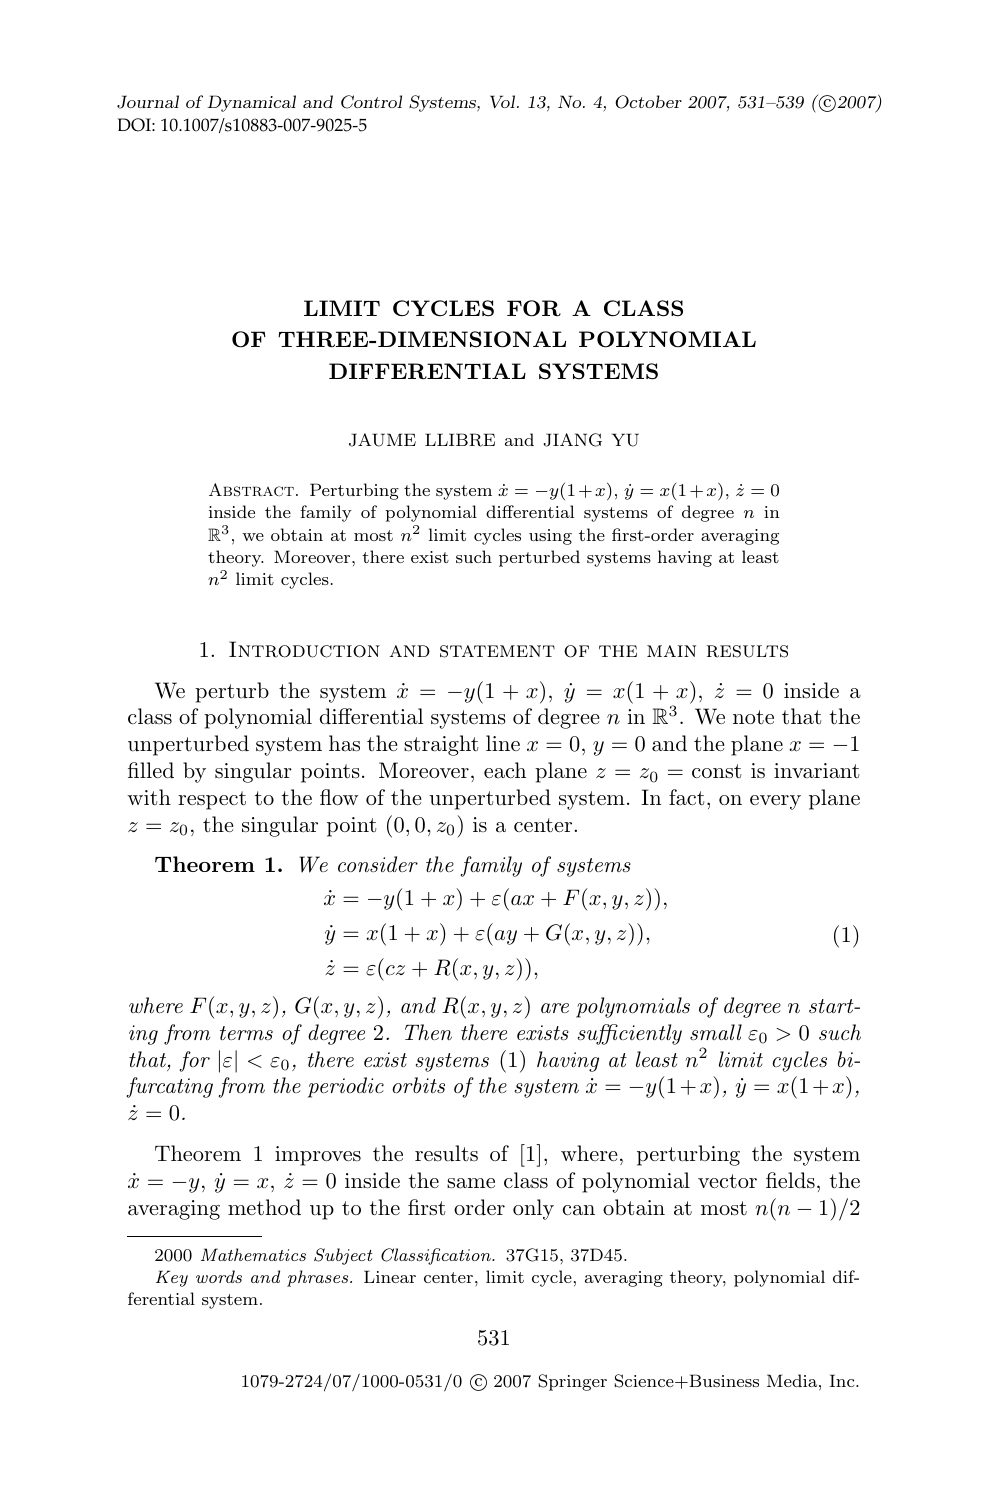 Limit Cycles For A Class Of Three Dimensional Polynomial Differential Systems Topic Of Research Paper In Mathematics Download Scholarly Article Pdf And Read For Free On Cyberleninka Open Science Hub